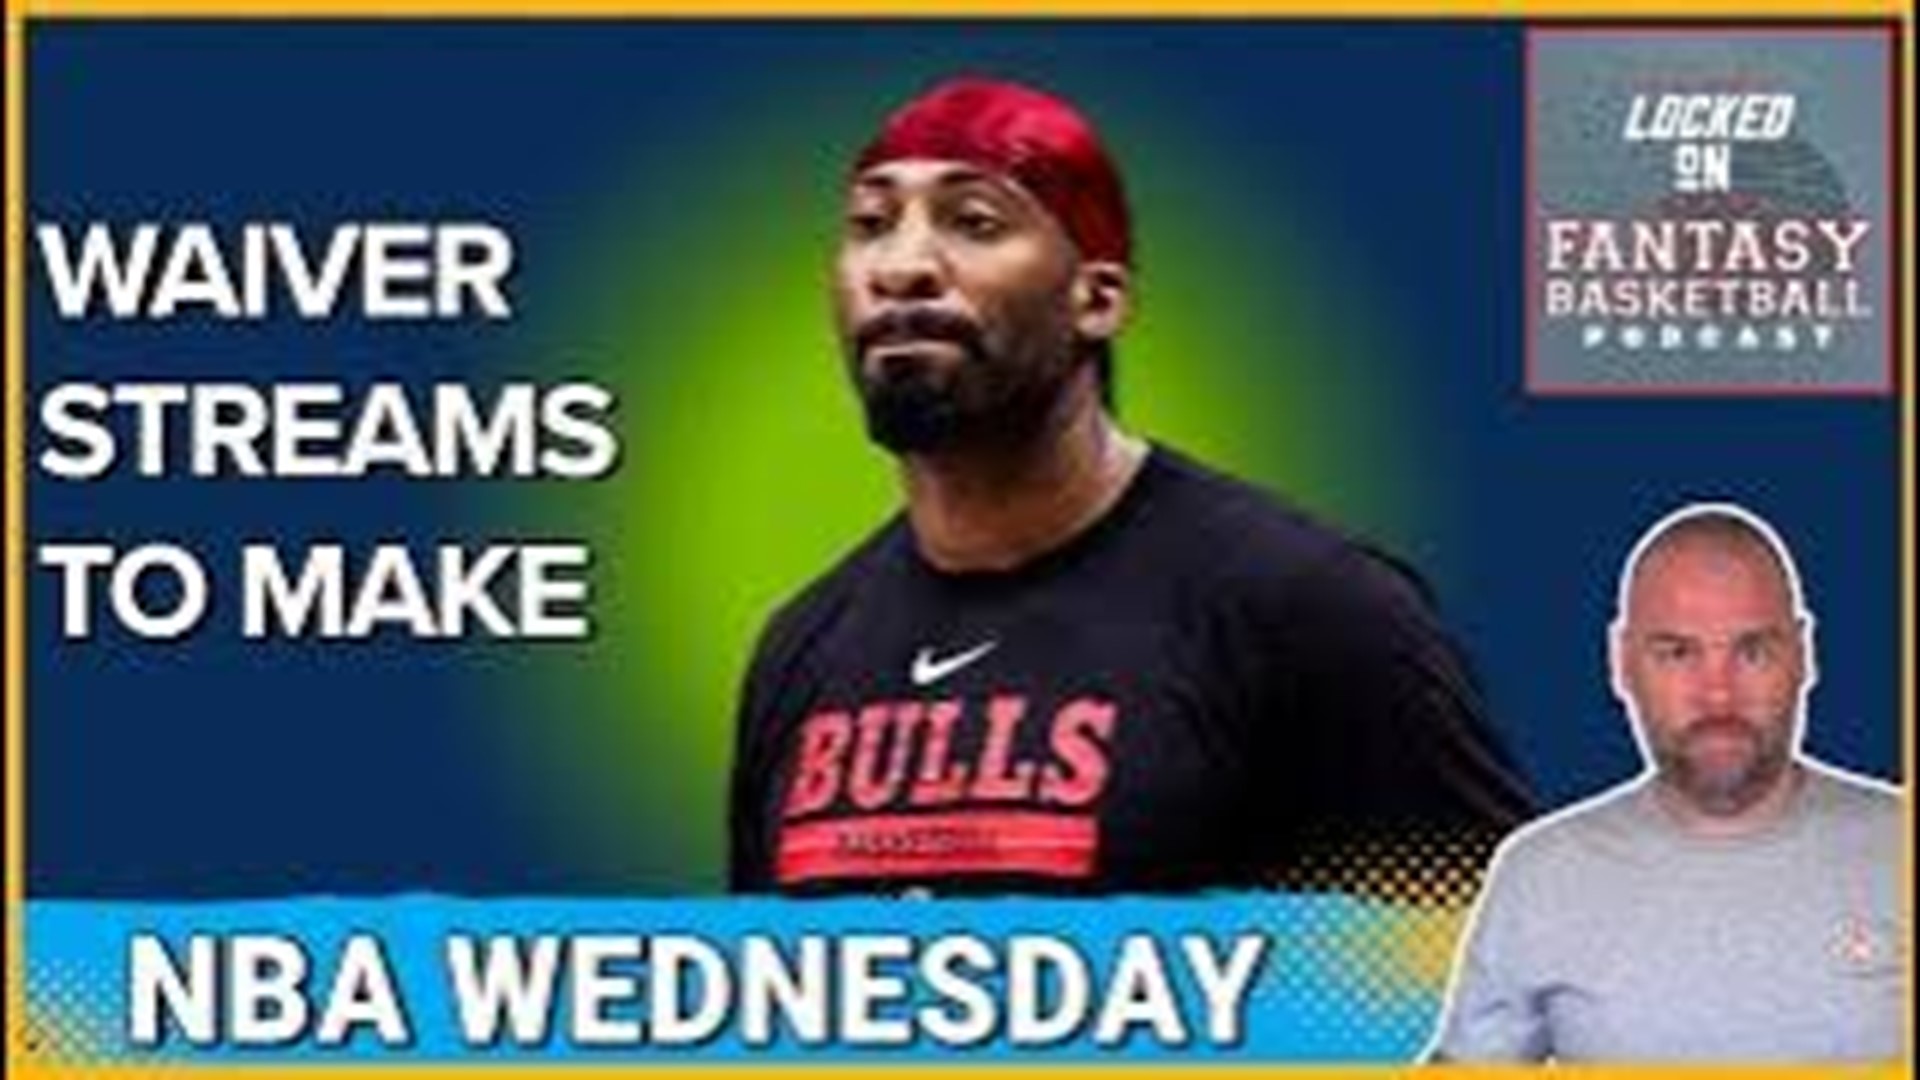 Get ready for Wednesday's NBA Fantasy Basketball games with Josh Lloyd's expert analysis. Could Andre Drummond's potential start against the Cavs be a game-changer?